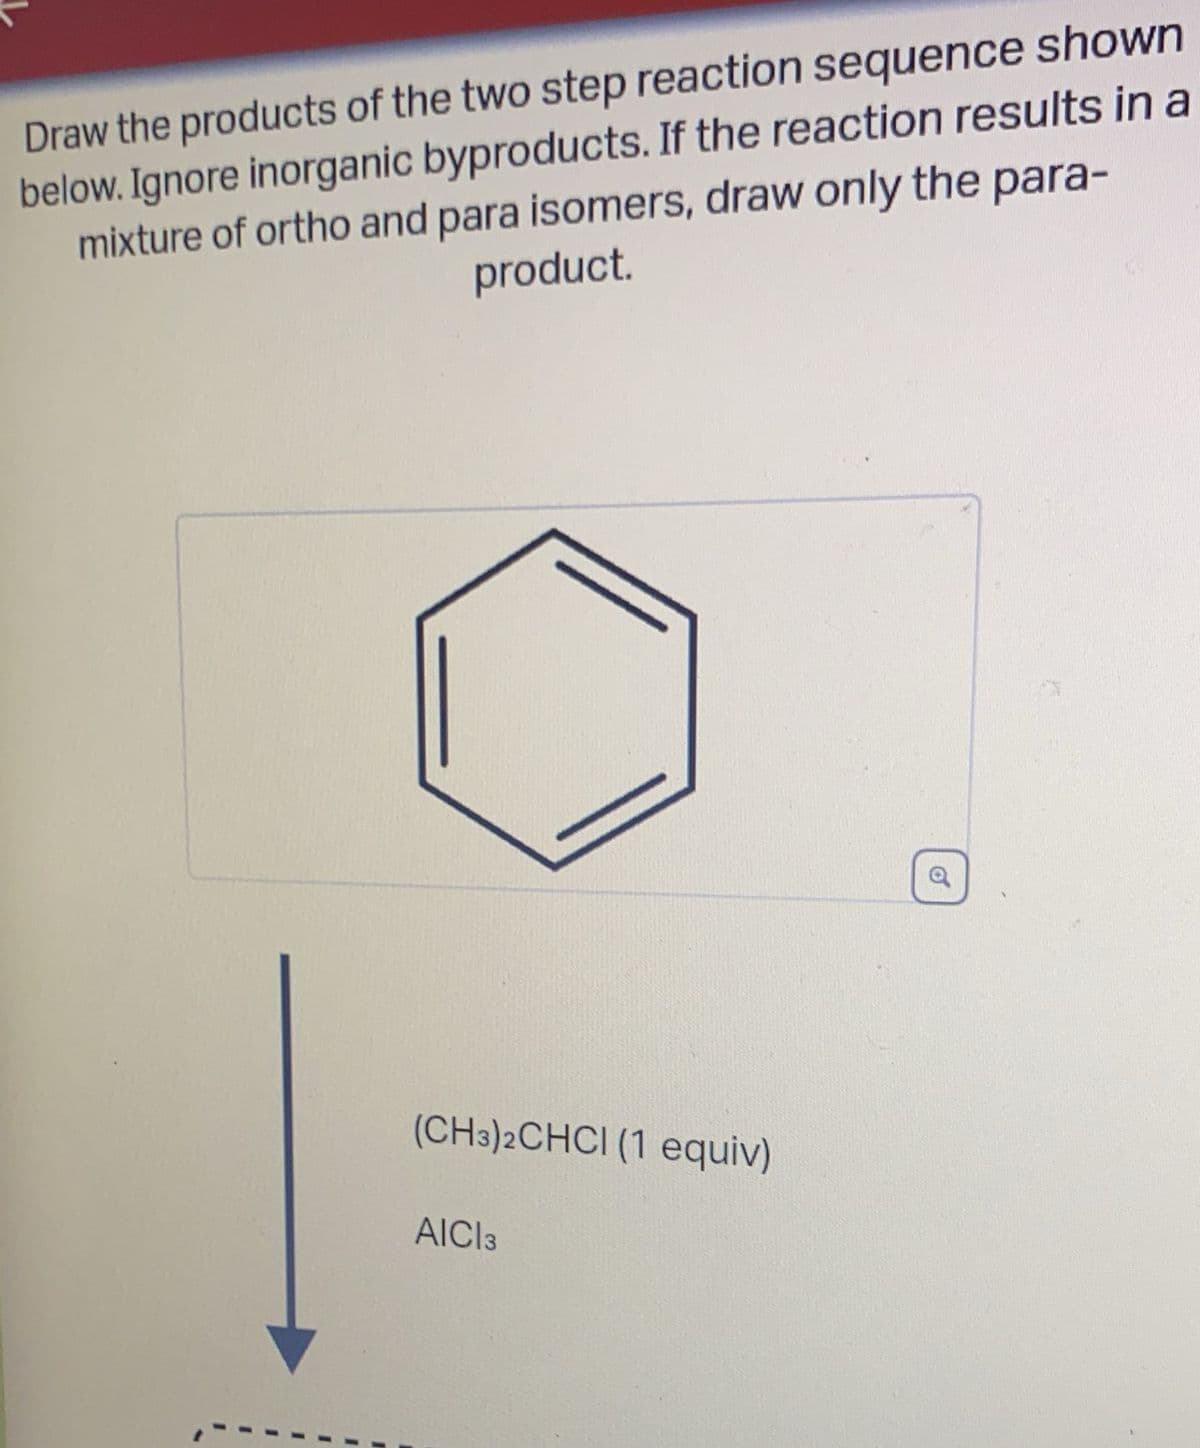 Draw the products of the two step reaction sequence shown
below. Ignore inorganic byproducts. If the reaction results in a
mixture of ortho and para isomers, draw only the para-
product.
(CH3)2CHCI (1 equiv)
AICI 3
a